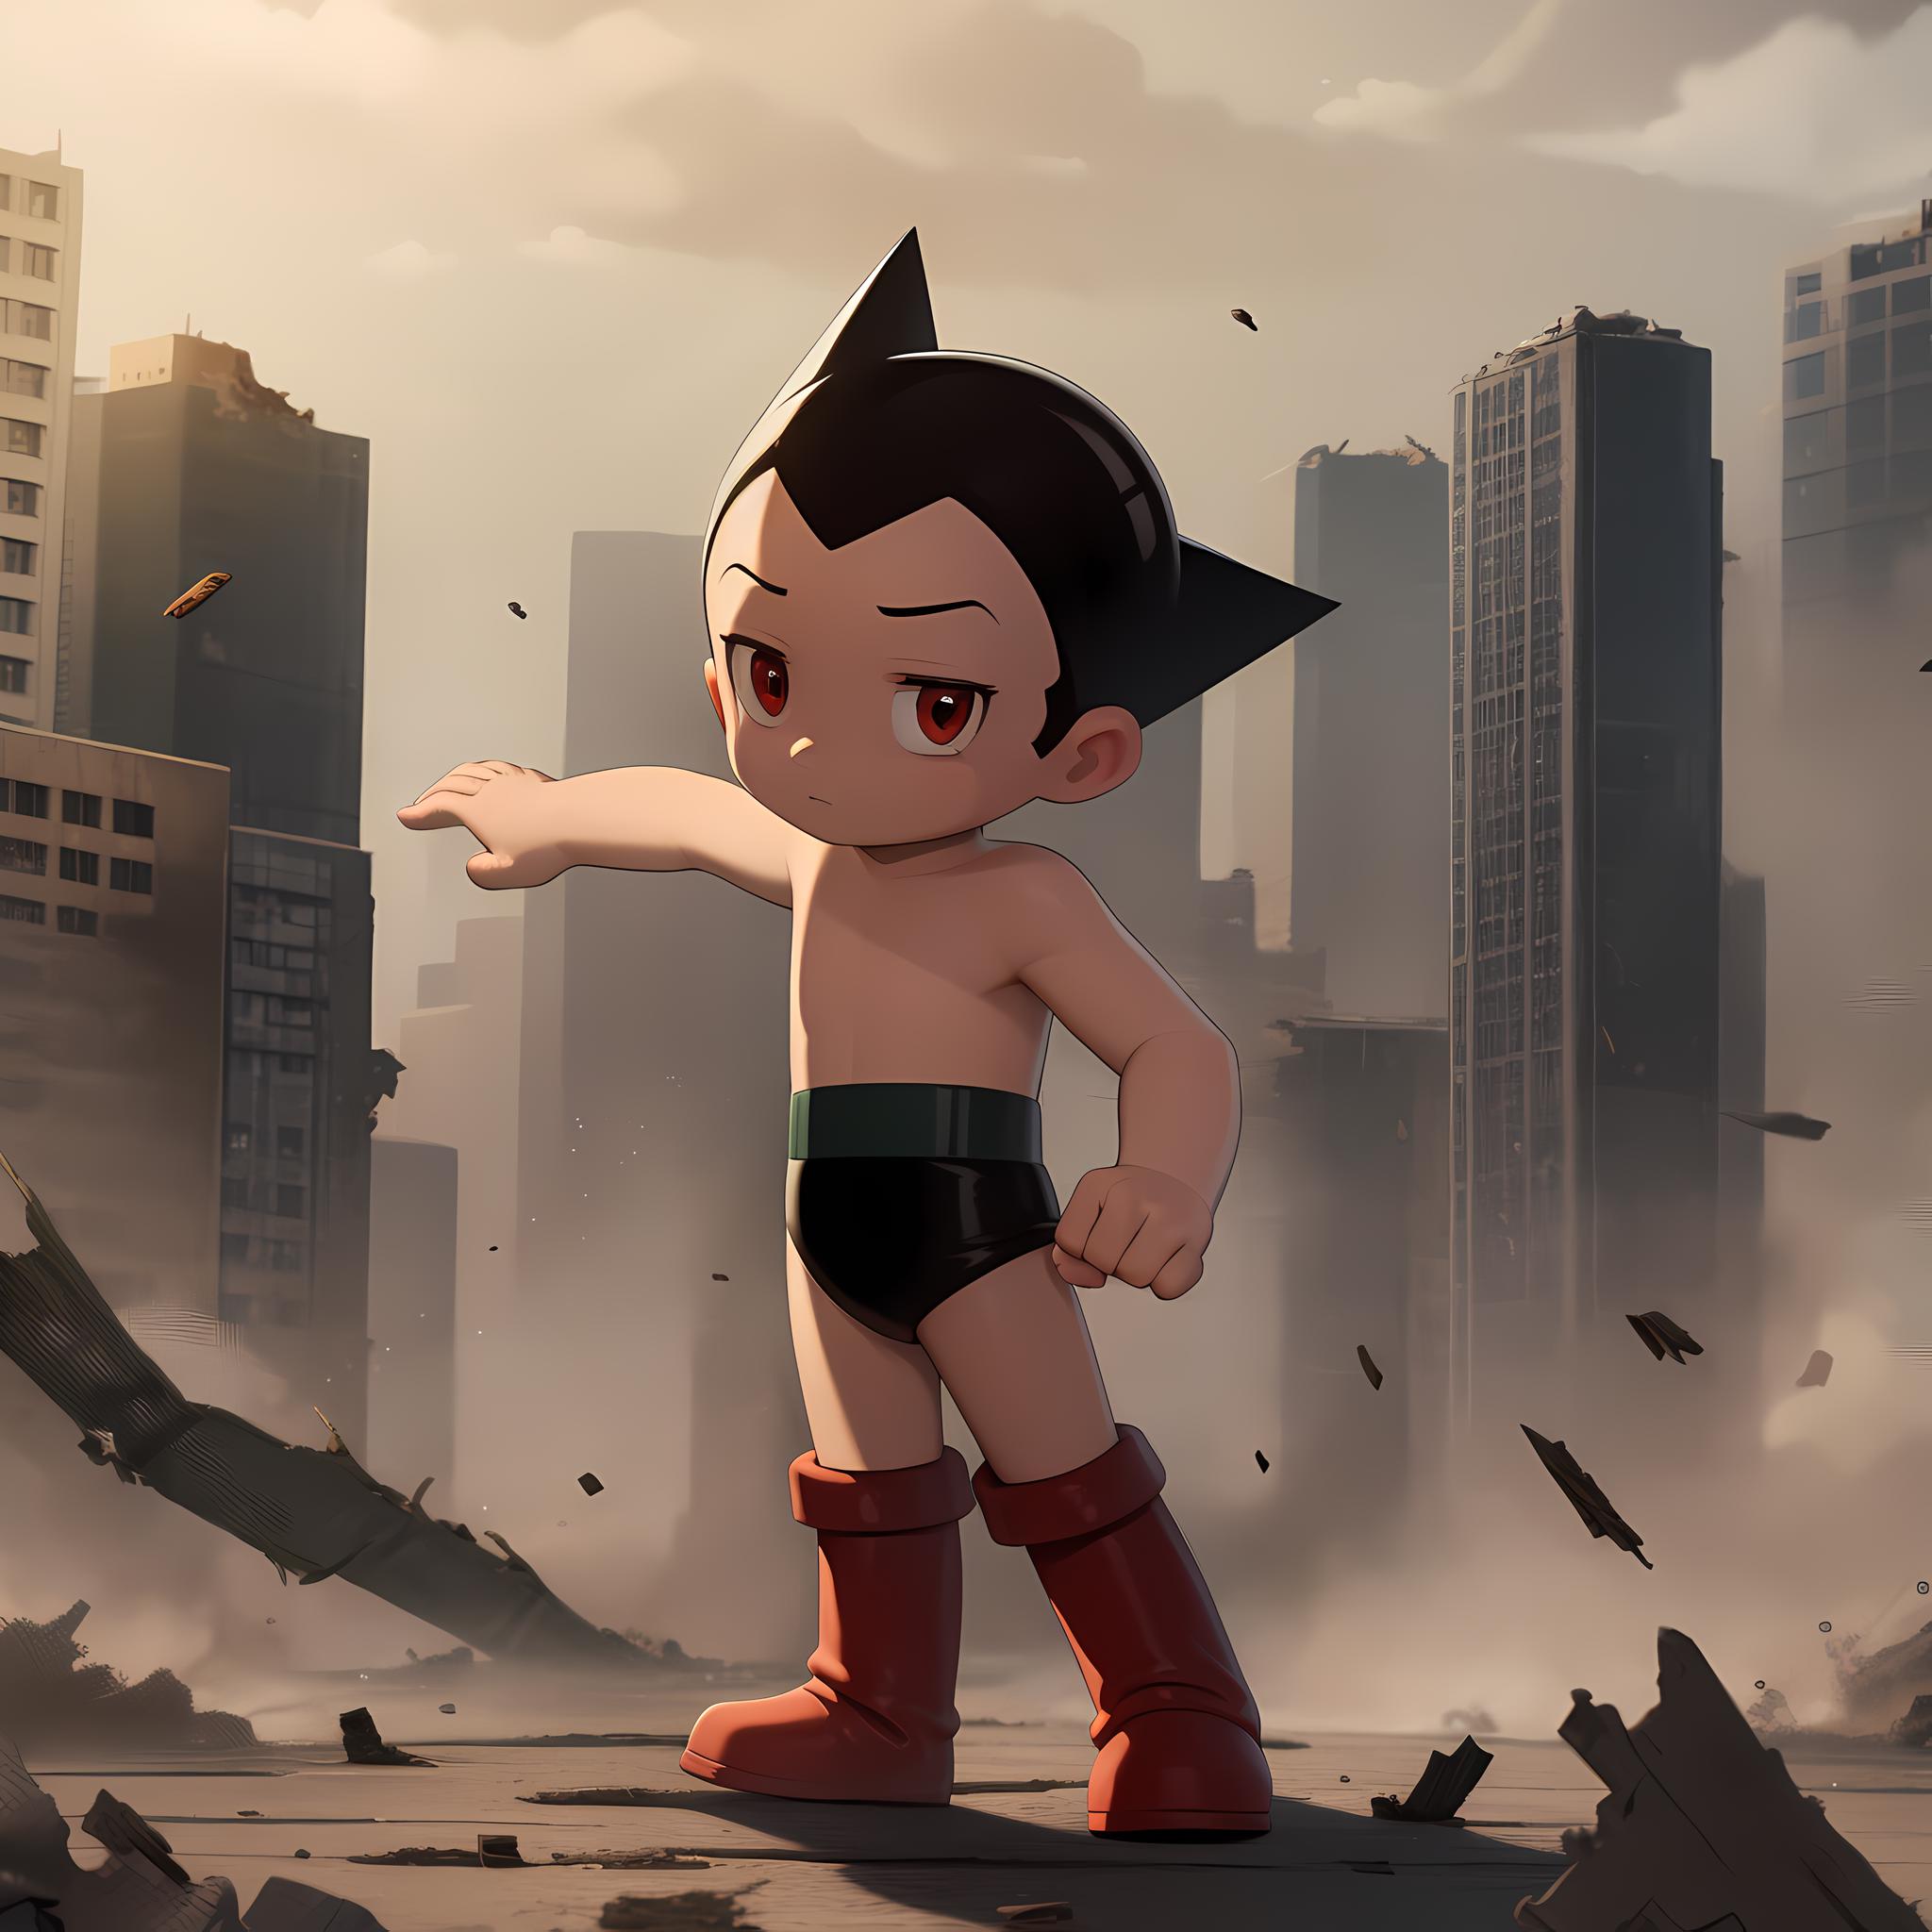 Astro Boy image by TheGooder